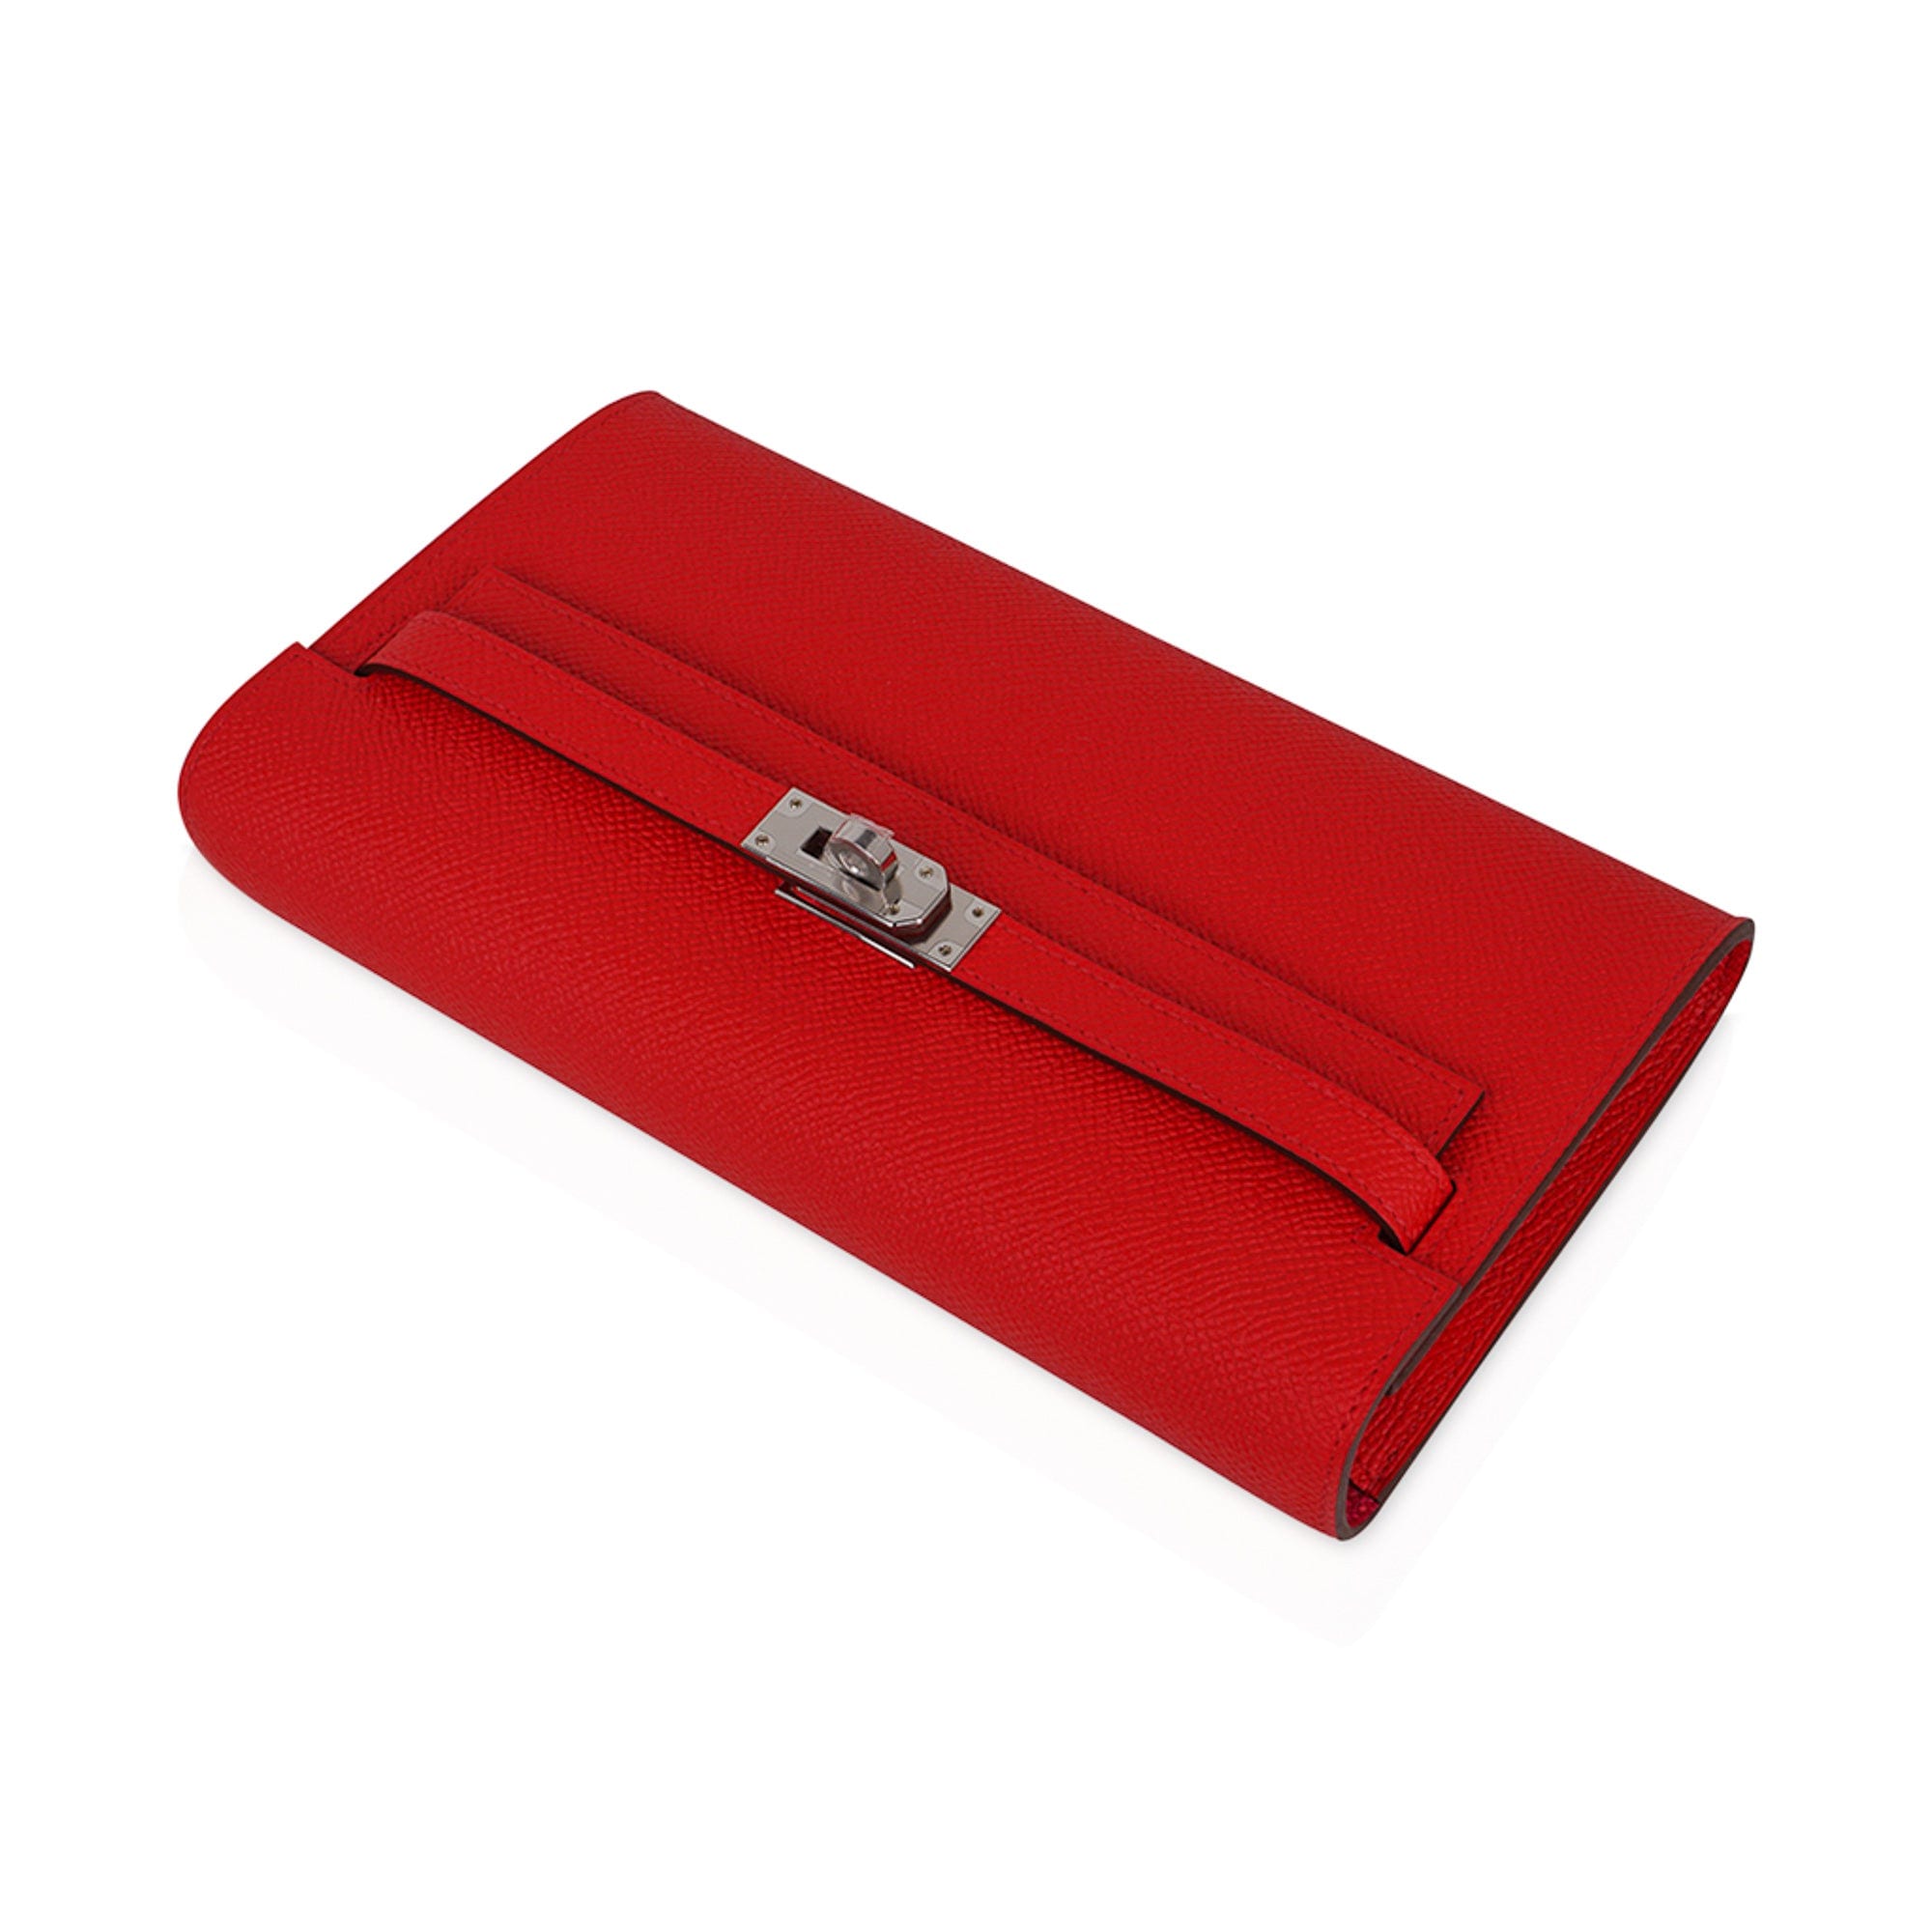 Replica Hermes Kelly Classique To Go Wallets